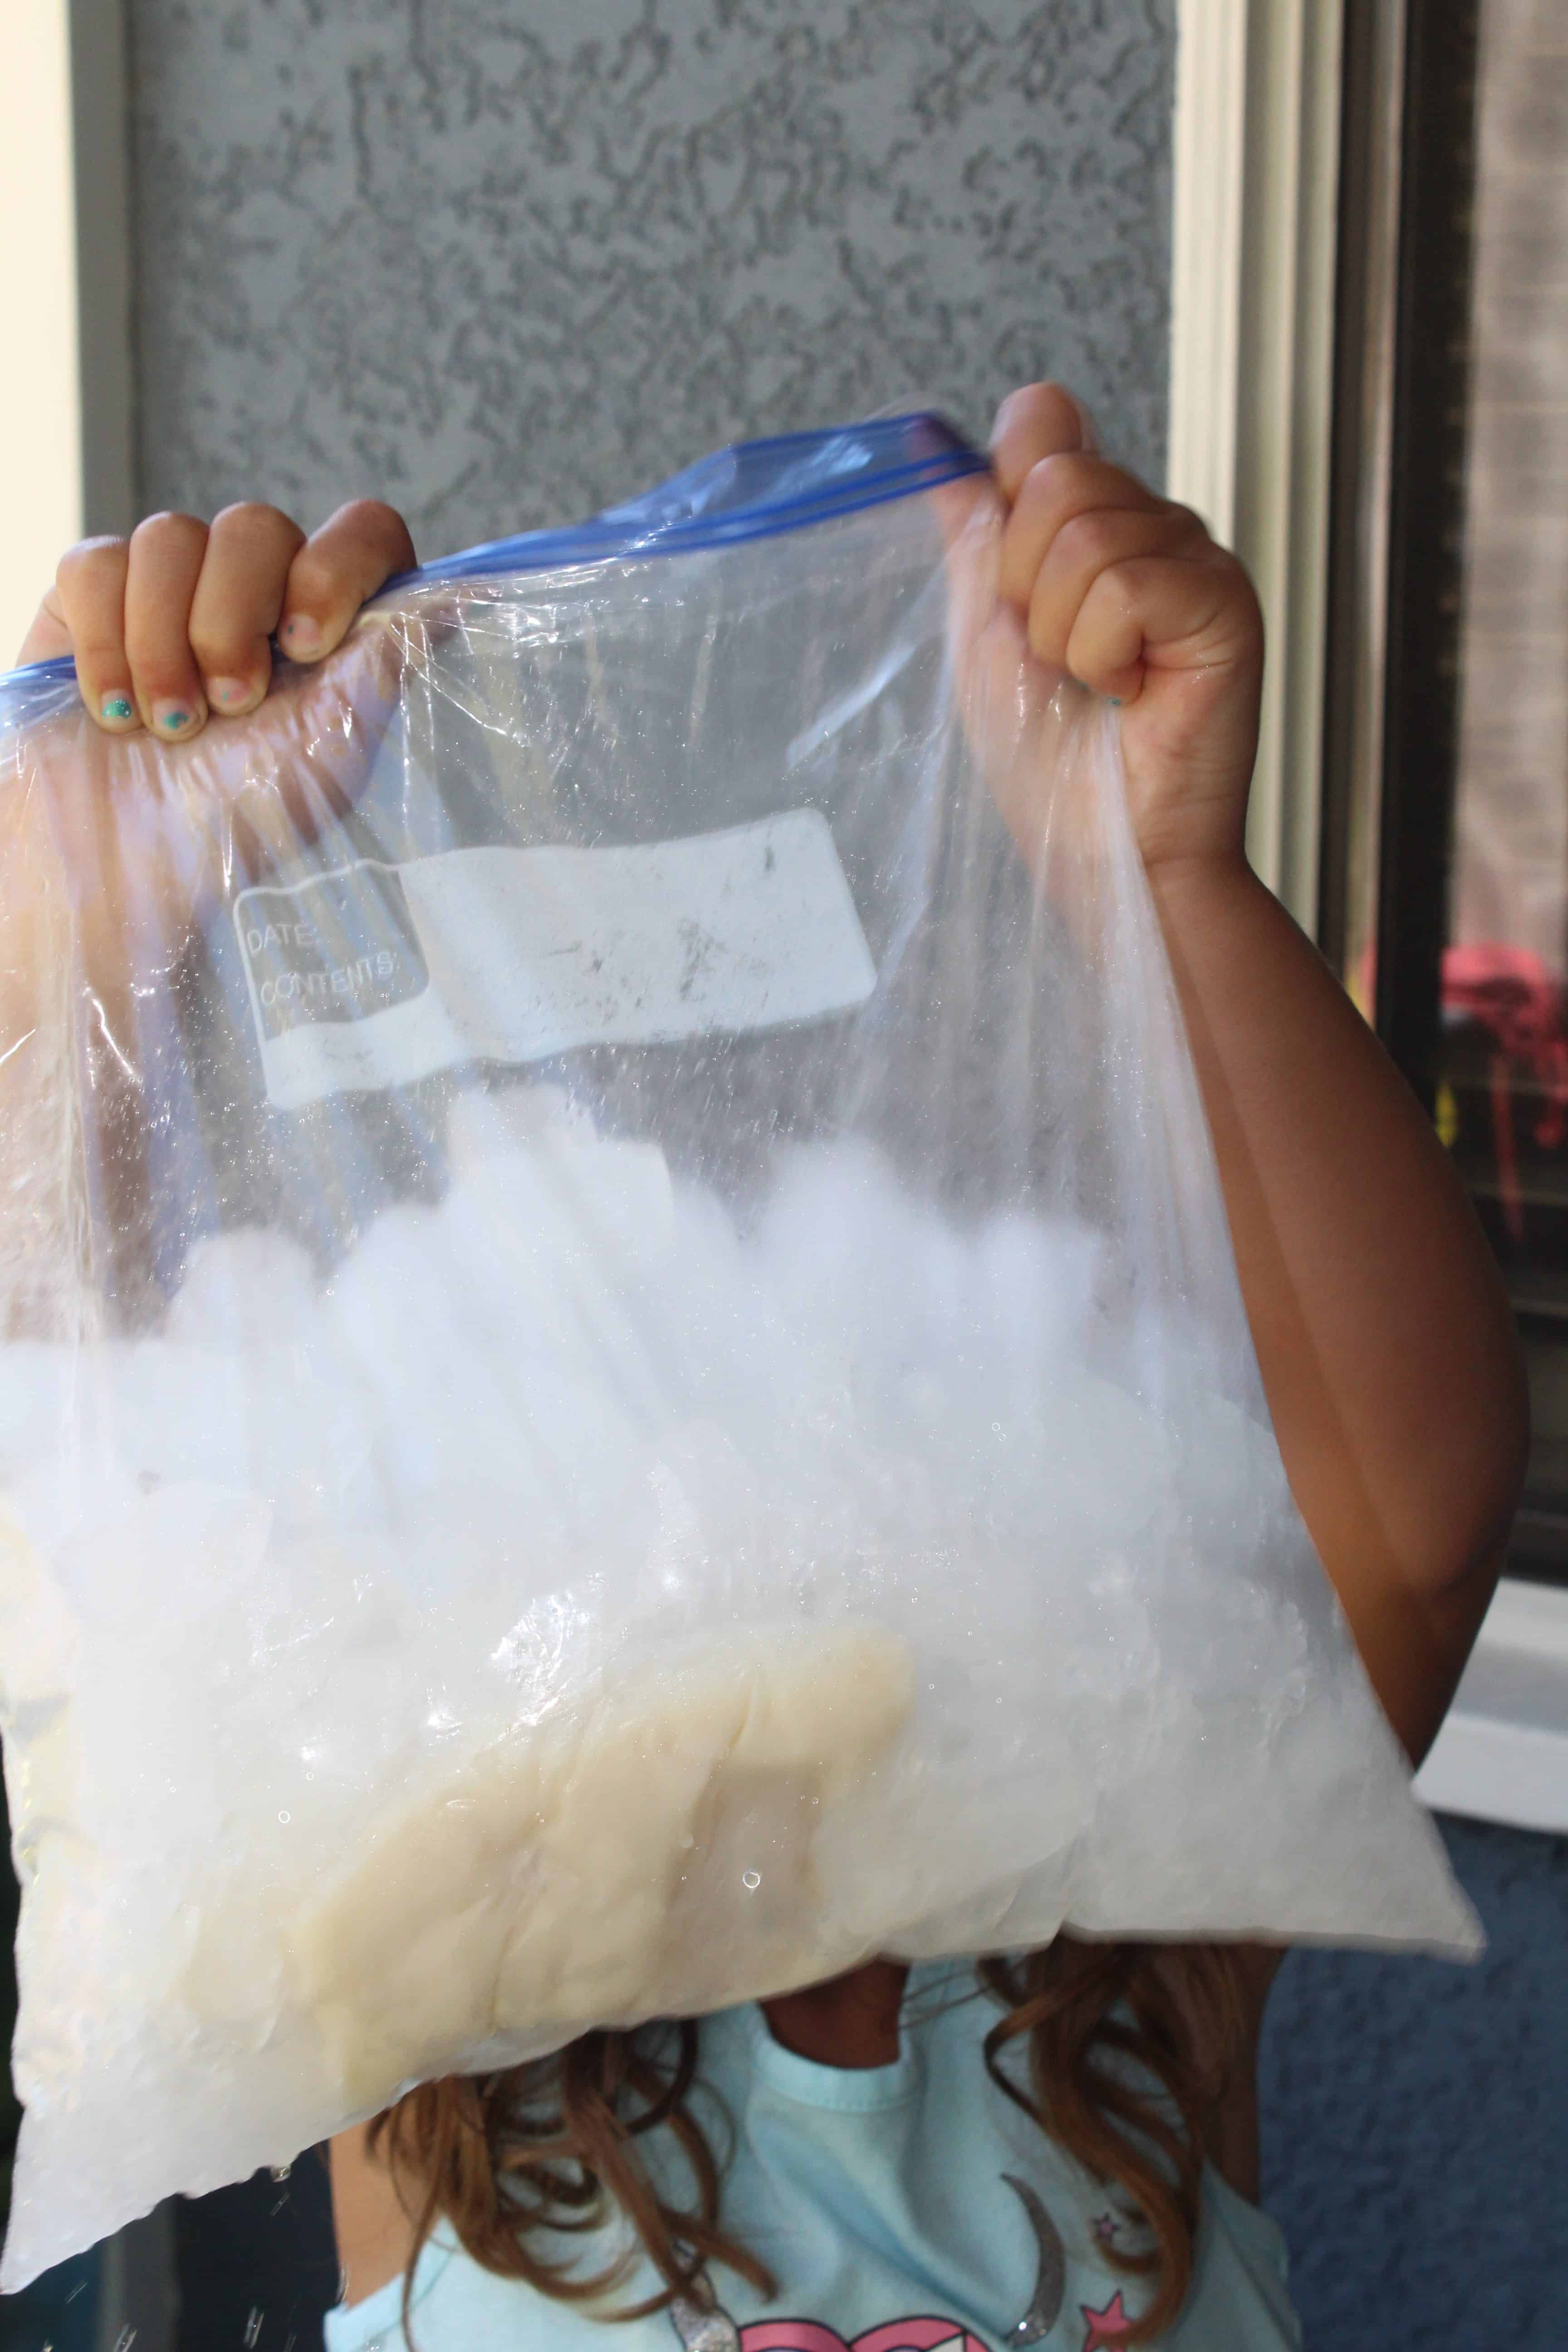 Child holding gallon back full of Ice and making ice cream